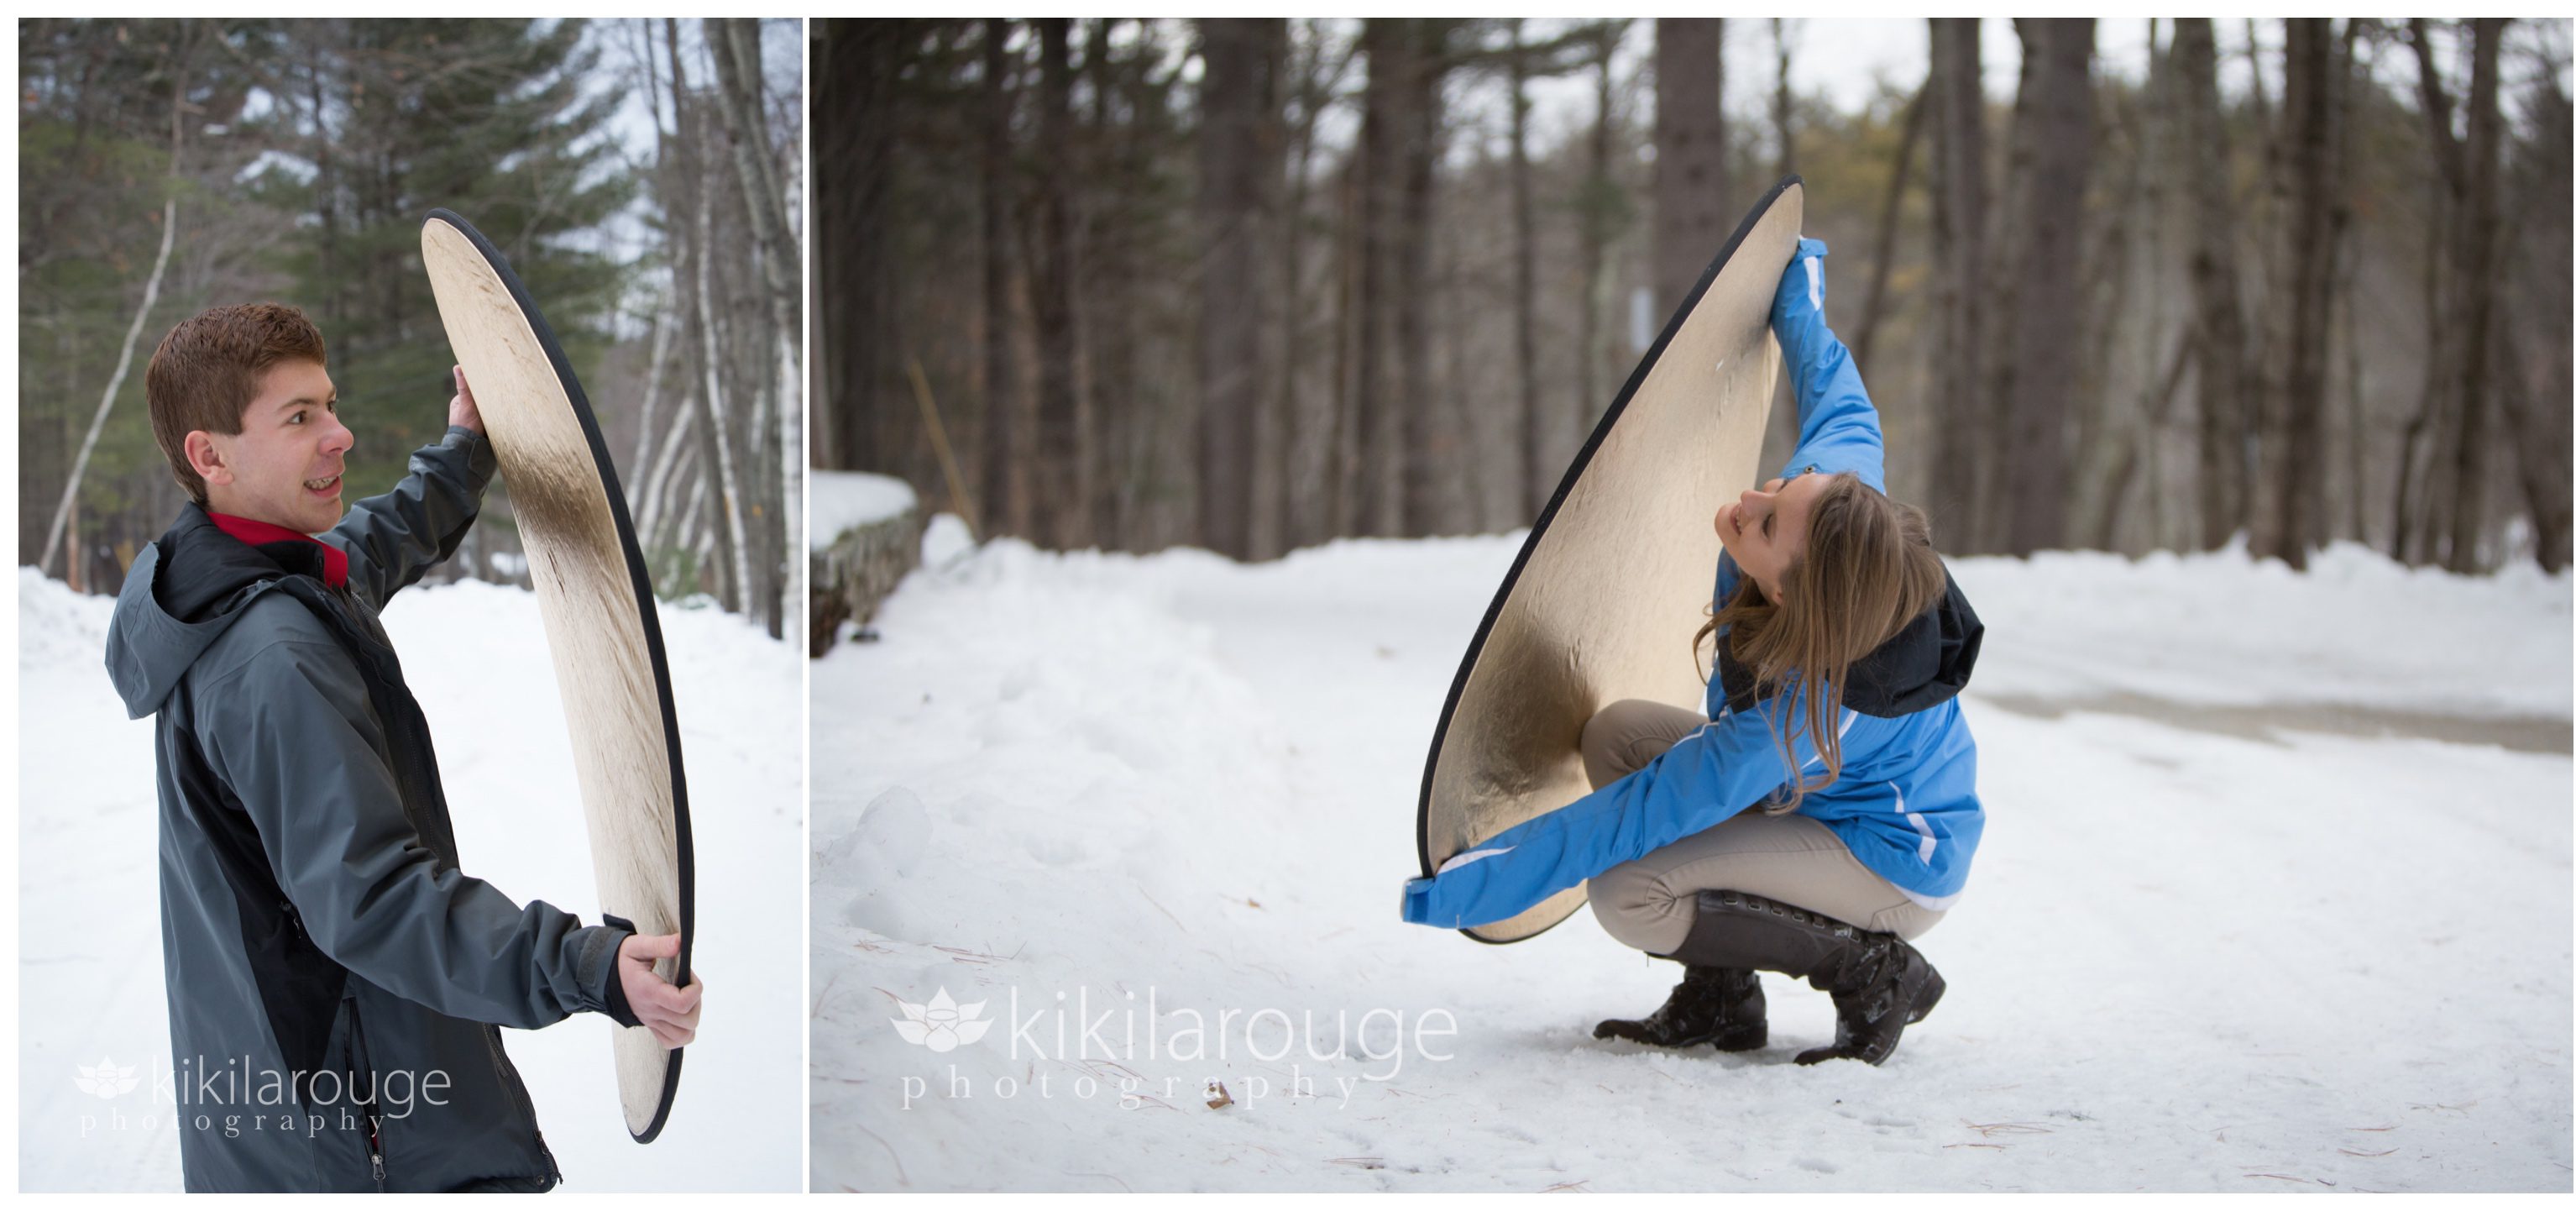 Outtakes of kids holding reflectors